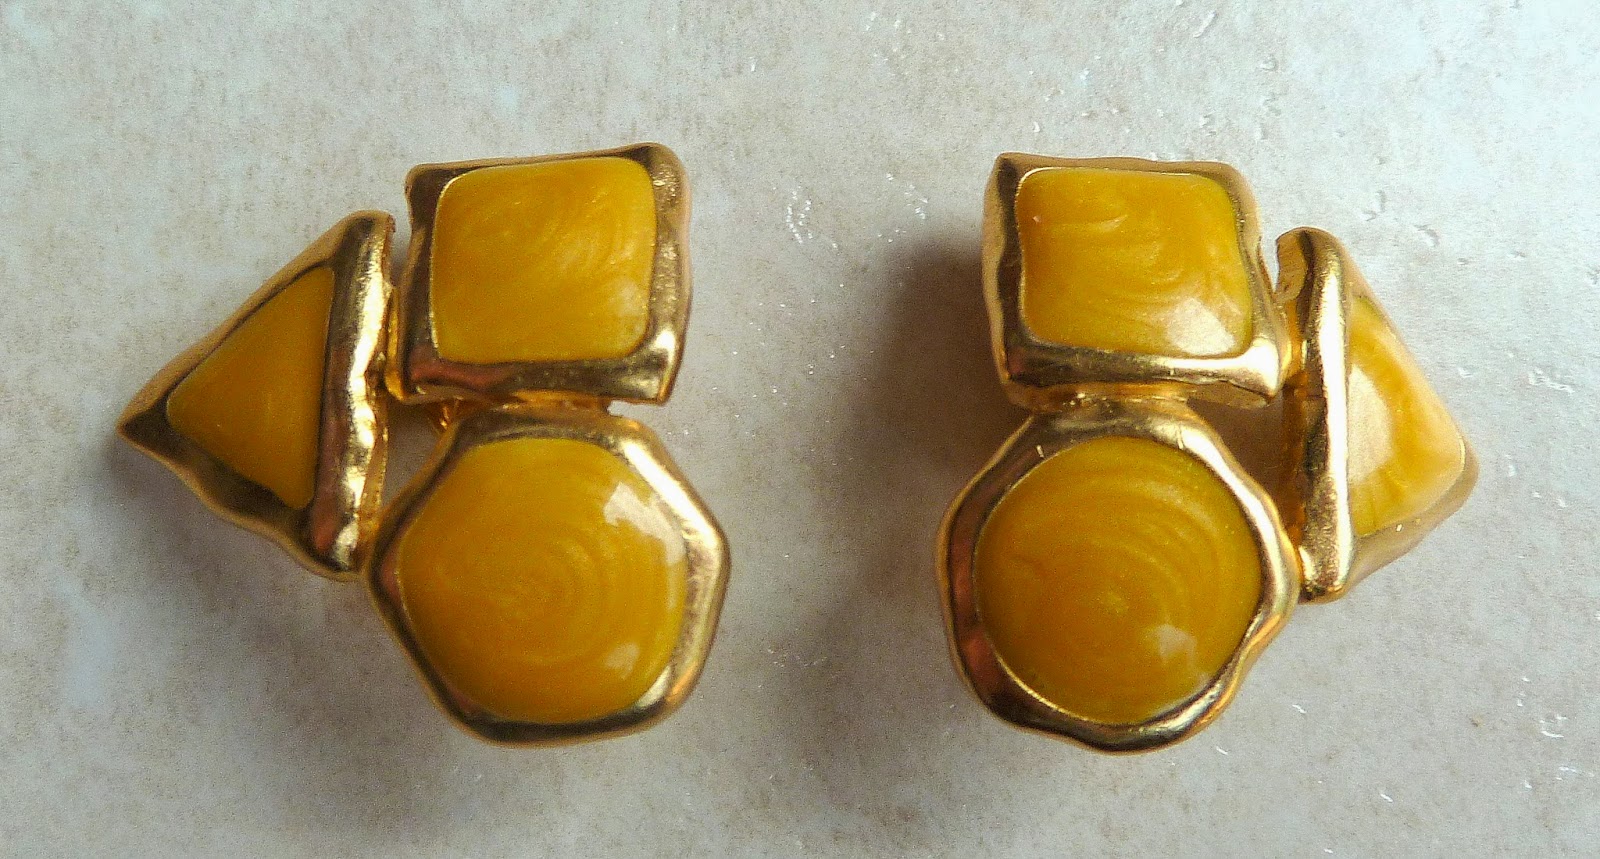 http://www.kcavintagegems.uk/vintage-1980s-trifari-yellow-and-gold-clip-on-earrings-142-p.asp